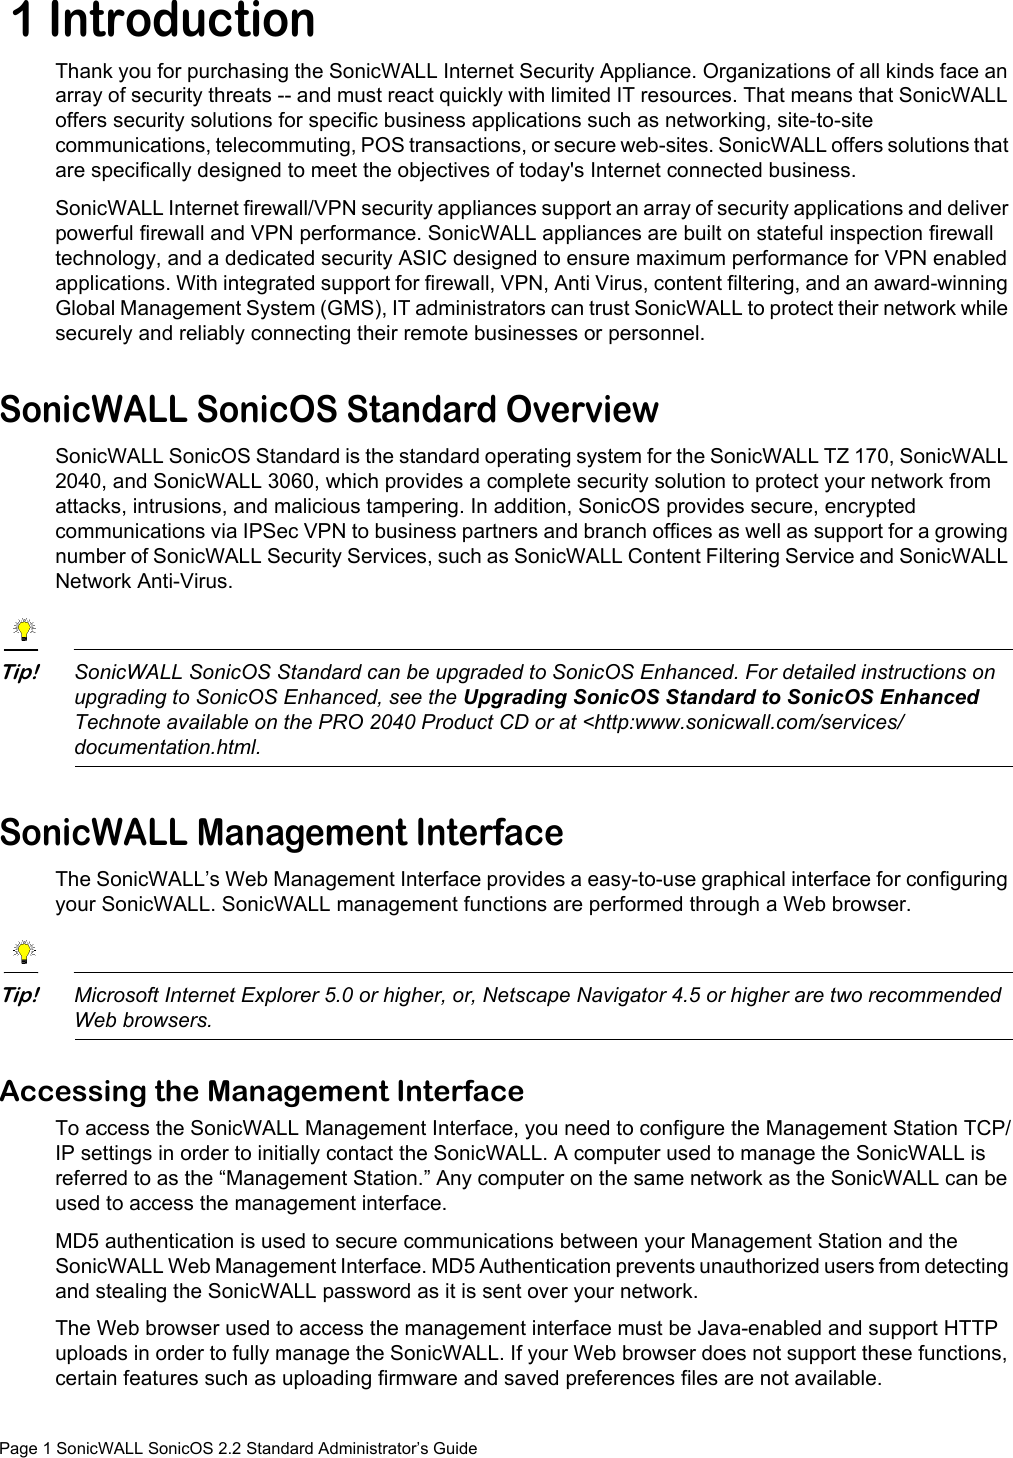 Page 1 SonicWALL SonicOS 2.2 Standard Administrator’s Guide 1 IntroductionThank you for purchasing the SonicWALL Internet Security Appliance. Organizations of all kinds face an array of security threats -- and must react quickly with limited IT resources. That means that SonicWALL offers security solutions for specific business applications such as networking, site-to-site communications, telecommuting, POS transactions, or secure web-sites. SonicWALL offers solutions that are specifically designed to meet the objectives of today&apos;s Internet connected business.SonicWALL Internet firewall/VPN security appliances support an array of security applications and deliver powerful firewall and VPN performance. SonicWALL appliances are built on stateful inspection firewall technology, and a dedicated security ASIC designed to ensure maximum performance for VPN enabled applications. With integrated support for firewall, VPN, Anti Virus, content filtering, and an award-winning Global Management System (GMS), IT administrators can trust SonicWALL to protect their network while securely and reliably connecting their remote businesses or personnel.SonicWALL SonicOS Standard OverviewSonicWALL SonicOS Standard is the standard operating system for the SonicWALL TZ 170, SonicWALL 2040, and SonicWALL 3060, which provides a complete security solution to protect your network from attacks, intrusions, and malicious tampering. In addition, SonicOS provides secure, encrypted communications via IPSec VPN to business partners and branch offices as well as support for a growing number of SonicWALL Security Services, such as SonicWALL Content Filtering Service and SonicWALL Network Anti-Virus.Tip!SonicWALL SonicOS Standard can be upgraded to SonicOS Enhanced. For detailed instructions on upgrading to SonicOS Enhanced, see the Upgrading SonicOS Standard to SonicOS Enhanced Technote available on the PRO 2040 Product CD or at &lt;http:www.sonicwall.com/services/documentation.html.SonicWALL Management InterfaceThe SonicWALL’s Web Management Interface provides a easy-to-use graphical interface for configuring your SonicWALL. SonicWALL management functions are performed through a Web browser.Tip!Microsoft Internet Explorer 5.0 or higher, or, Netscape Navigator 4.5 or higher are two recommended Web browsers. Accessing the Management InterfaceTo access the SonicWALL Management Interface, you need to configure the Management Station TCP/IP settings in order to initially contact the SonicWALL. A computer used to manage the SonicWALL is referred to as the “Management Station.” Any computer on the same network as the SonicWALL can be used to access the management interface.MD5 authentication is used to secure communications between your Management Station and the SonicWALL Web Management Interface. MD5 Authentication prevents unauthorized users from detecting and stealing the SonicWALL password as it is sent over your network.The Web browser used to access the management interface must be Java-enabled and support HTTP uploads in order to fully manage the SonicWALL. If your Web browser does not support these functions, certain features such as uploading firmware and saved preferences files are not available.